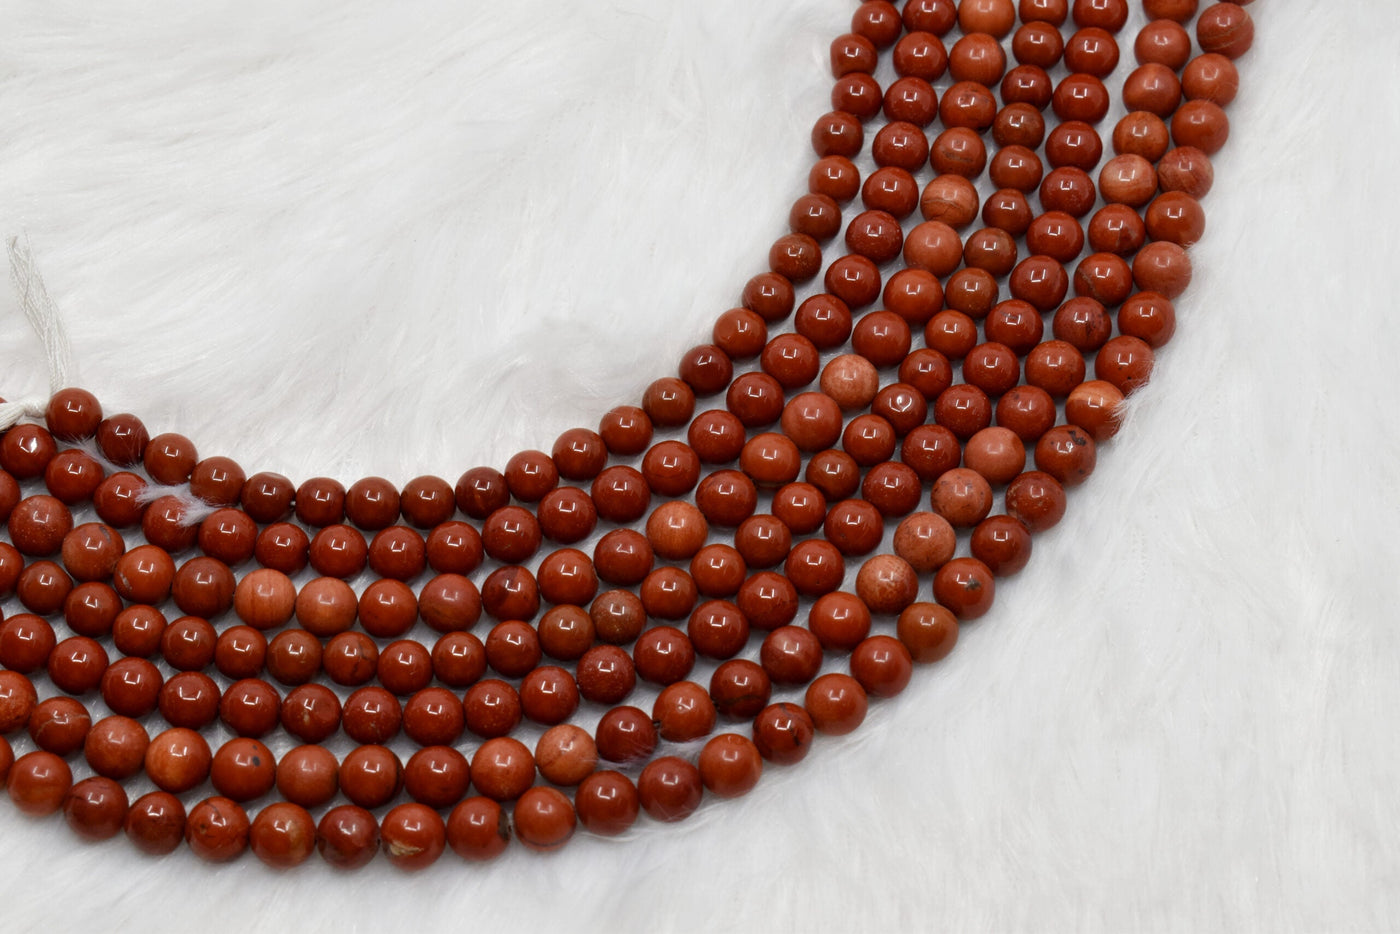 Red Jasper Beads, Natural Round Crystal Beads 4mm to 12mm